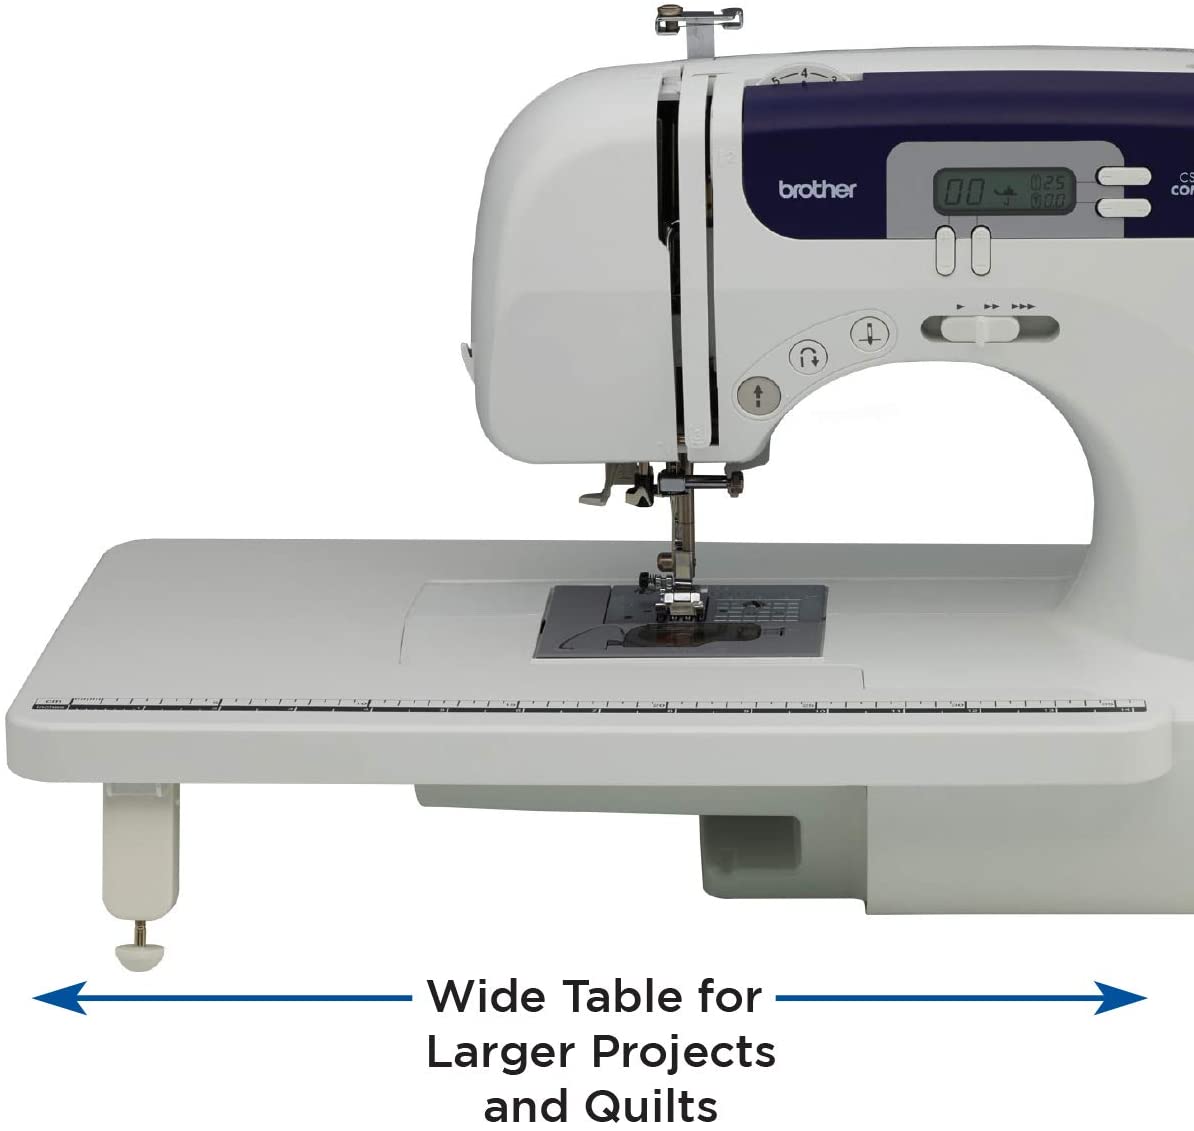 Brother Sewing and Quilting Machine, CS6000i, 60 Built-in Stitches, 2.0  LCD Display, Wide Table, 9 Included Sewing Feet